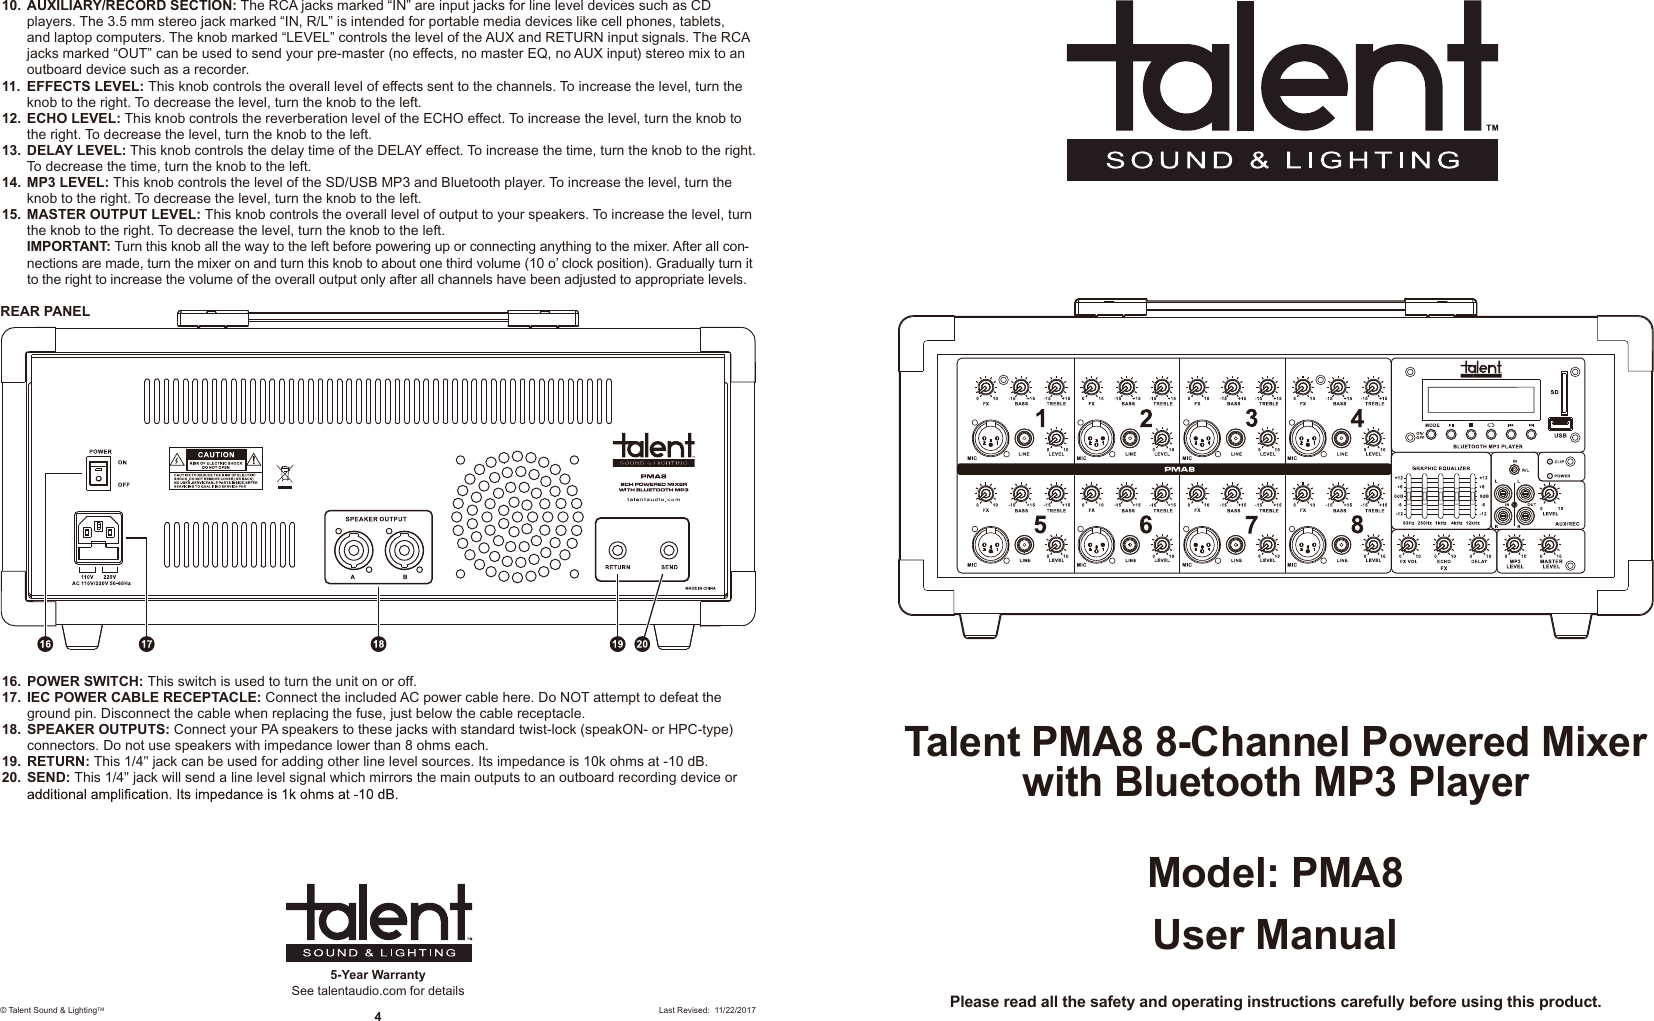 User ManualModel: PMA8Talent PMA8 8-Channel Powered Mixer with Bluetooth MP3 PlayerPlease read all the safety and operating instructions carefully before using this product.5-Year WarrantySee talentaudio.com for details© Talent Sound &amp; LightingTM 4Last Revised:  11/22/201710.  AUXILIARY/RECORD SECTION: The RCA jacks marked “IN” are input jacks for line level devices such as CD players. The 3.5 mm stereo jack marked “IN, R/L” is intended for portable media devices like cell phones, tablets, and laptop computers. The knob marked “LEVEL” controls the level of the AUX and RETURN input signals. The RCA jacks marked “OUT” can be used to send your pre-master (no effects, no master EQ, no AUX input) stereo mix to an outboard device such as a recorder. 11.  EFFECTS LEVEL: This knob controls the overall level of effects sent to the channels. To increase the level, turn the knob to the right. To decrease the level, turn the knob to the left. 12.  ECHO LEVEL: This knob controls the reverberation level of the ECHO effect. To increase the level, turn the knob to the right. To decrease the level, turn the knob to the left.13.  DELAY LEVEL: This knob controls the delay time of the DELAY effect. To increase the time, turn the knob to the right. To decrease the time, turn the knob to the left.14.  MP3 LEVEL: This knob controls the level of the SD/USB MP3 and Bluetooth player. To increase the level, turn the knob to the right. To decrease the level, turn the knob to the left.15.  MASTER OUTPUT LEVEL: This knob controls the overall level of output to your speakers. To increase the level, turn the knob to the right. To decrease the level, turn the knob to the left. IMPORTANT: Turn this knob all the way to the left before powering up or connecting anything to the mixer. After all con-nections are made, turn the mixer on and turn this knob to about one third volume (10 o’ clock position). Gradually turn it to the right to increase the volume of the overall output only after all channels have been adjusted to appropriate levels.REAR PANEL16.  POWER SWITCH: This switch is used to turn the unit on or off. 17.  IEC POWER CABLE RECEPTACLE: Connect the included AC power cable here. Do NOT attempt to defeat the ground pin. Disconnect the cable when replacing the fuse, just below the cable receptacle.18.  SPEAKER OUTPUTS: Connect your PA speakers to these jacks with standard twist-lock (speakON- or HPC-type) connectors. Do not use speakers with impedance lower than 8 ohms each. 19.  RETURN: This 1/4&quot; jack can be used for adding other line level sources. Its impedance is 10k ohms at -10 dB. 20.  SEND: This 1/4&quot; jack will send a line level signal which mirrors the main outputs to an outboard recording device or 